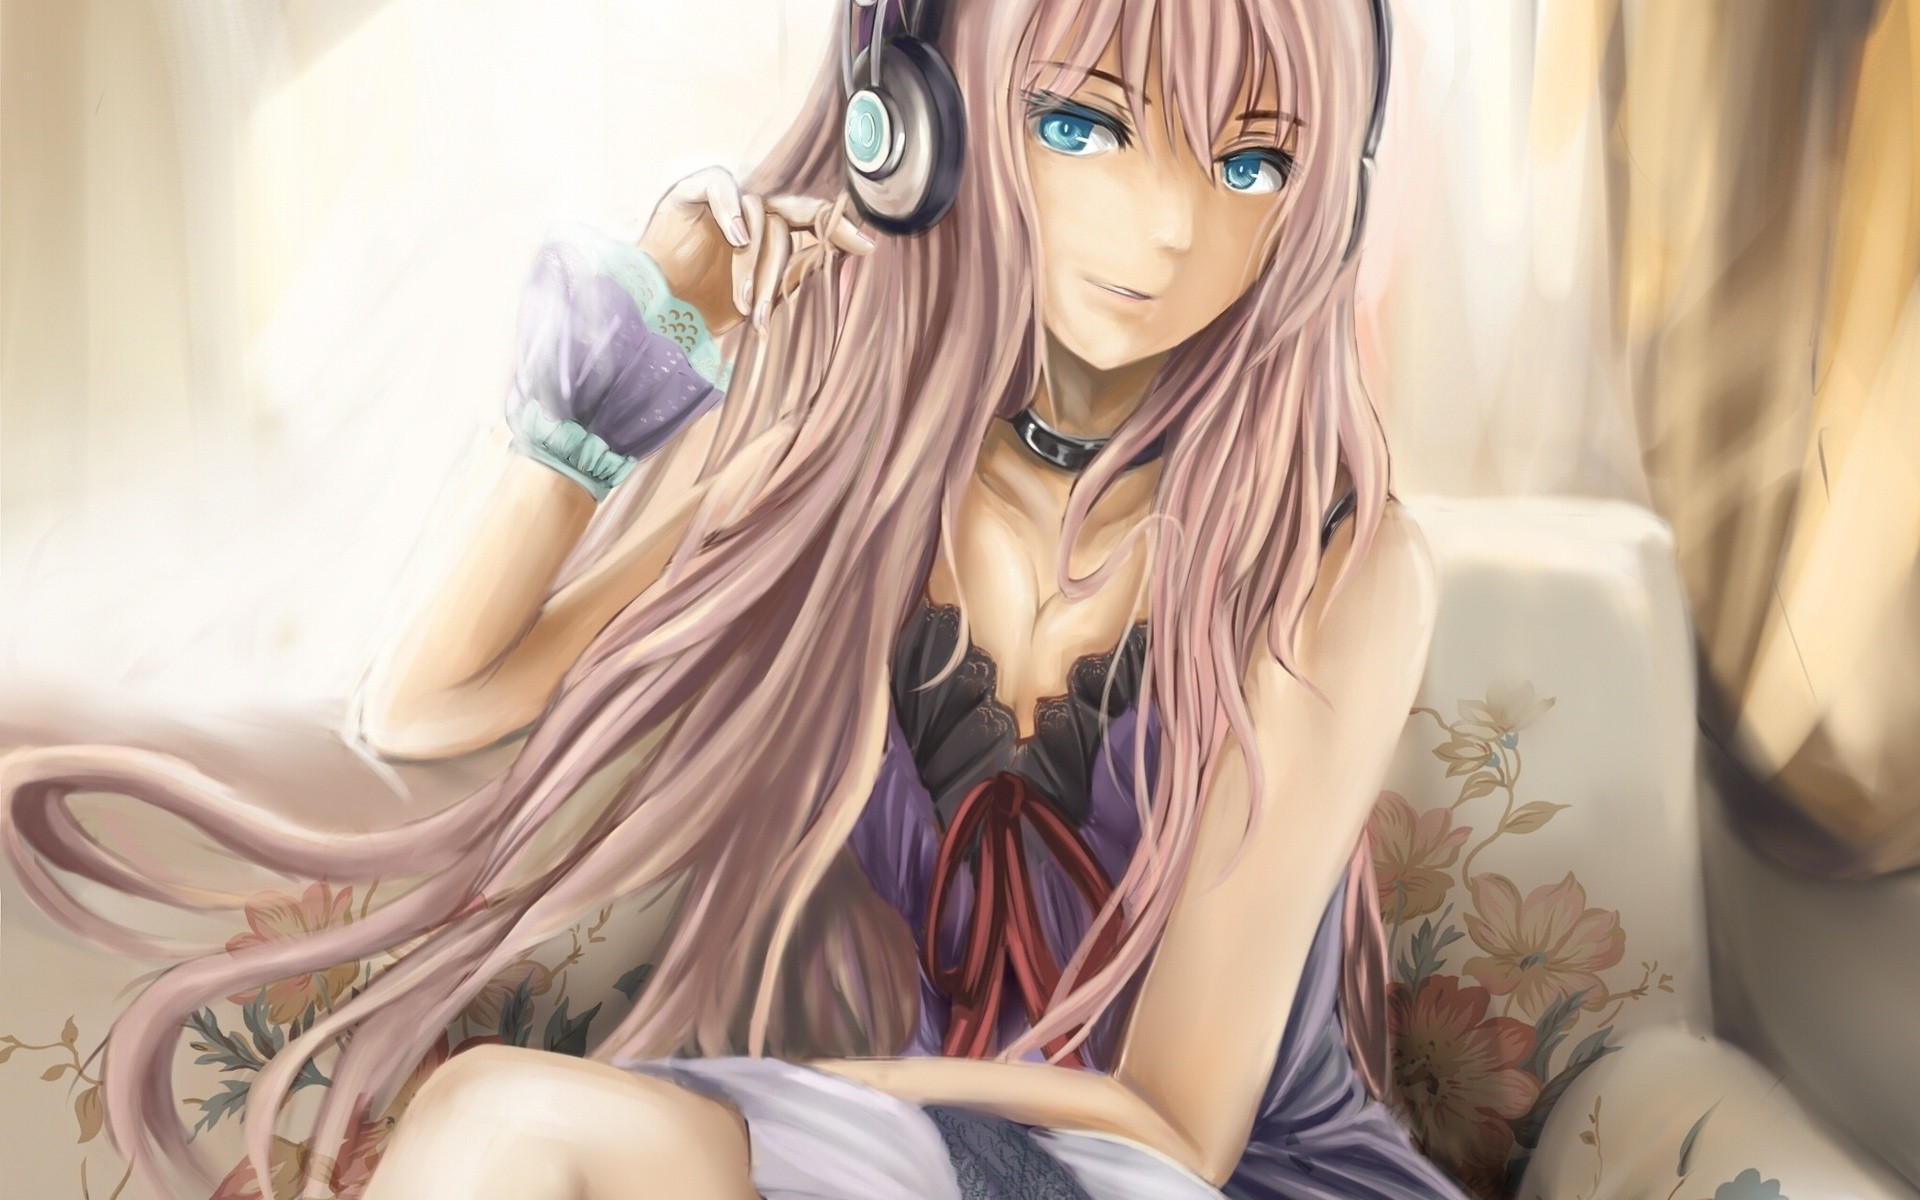 anime, Music, Vocaloid, Megurine Luka, Soft Shading Wallpapers HD / Desktop  and Mobile Backgrounds